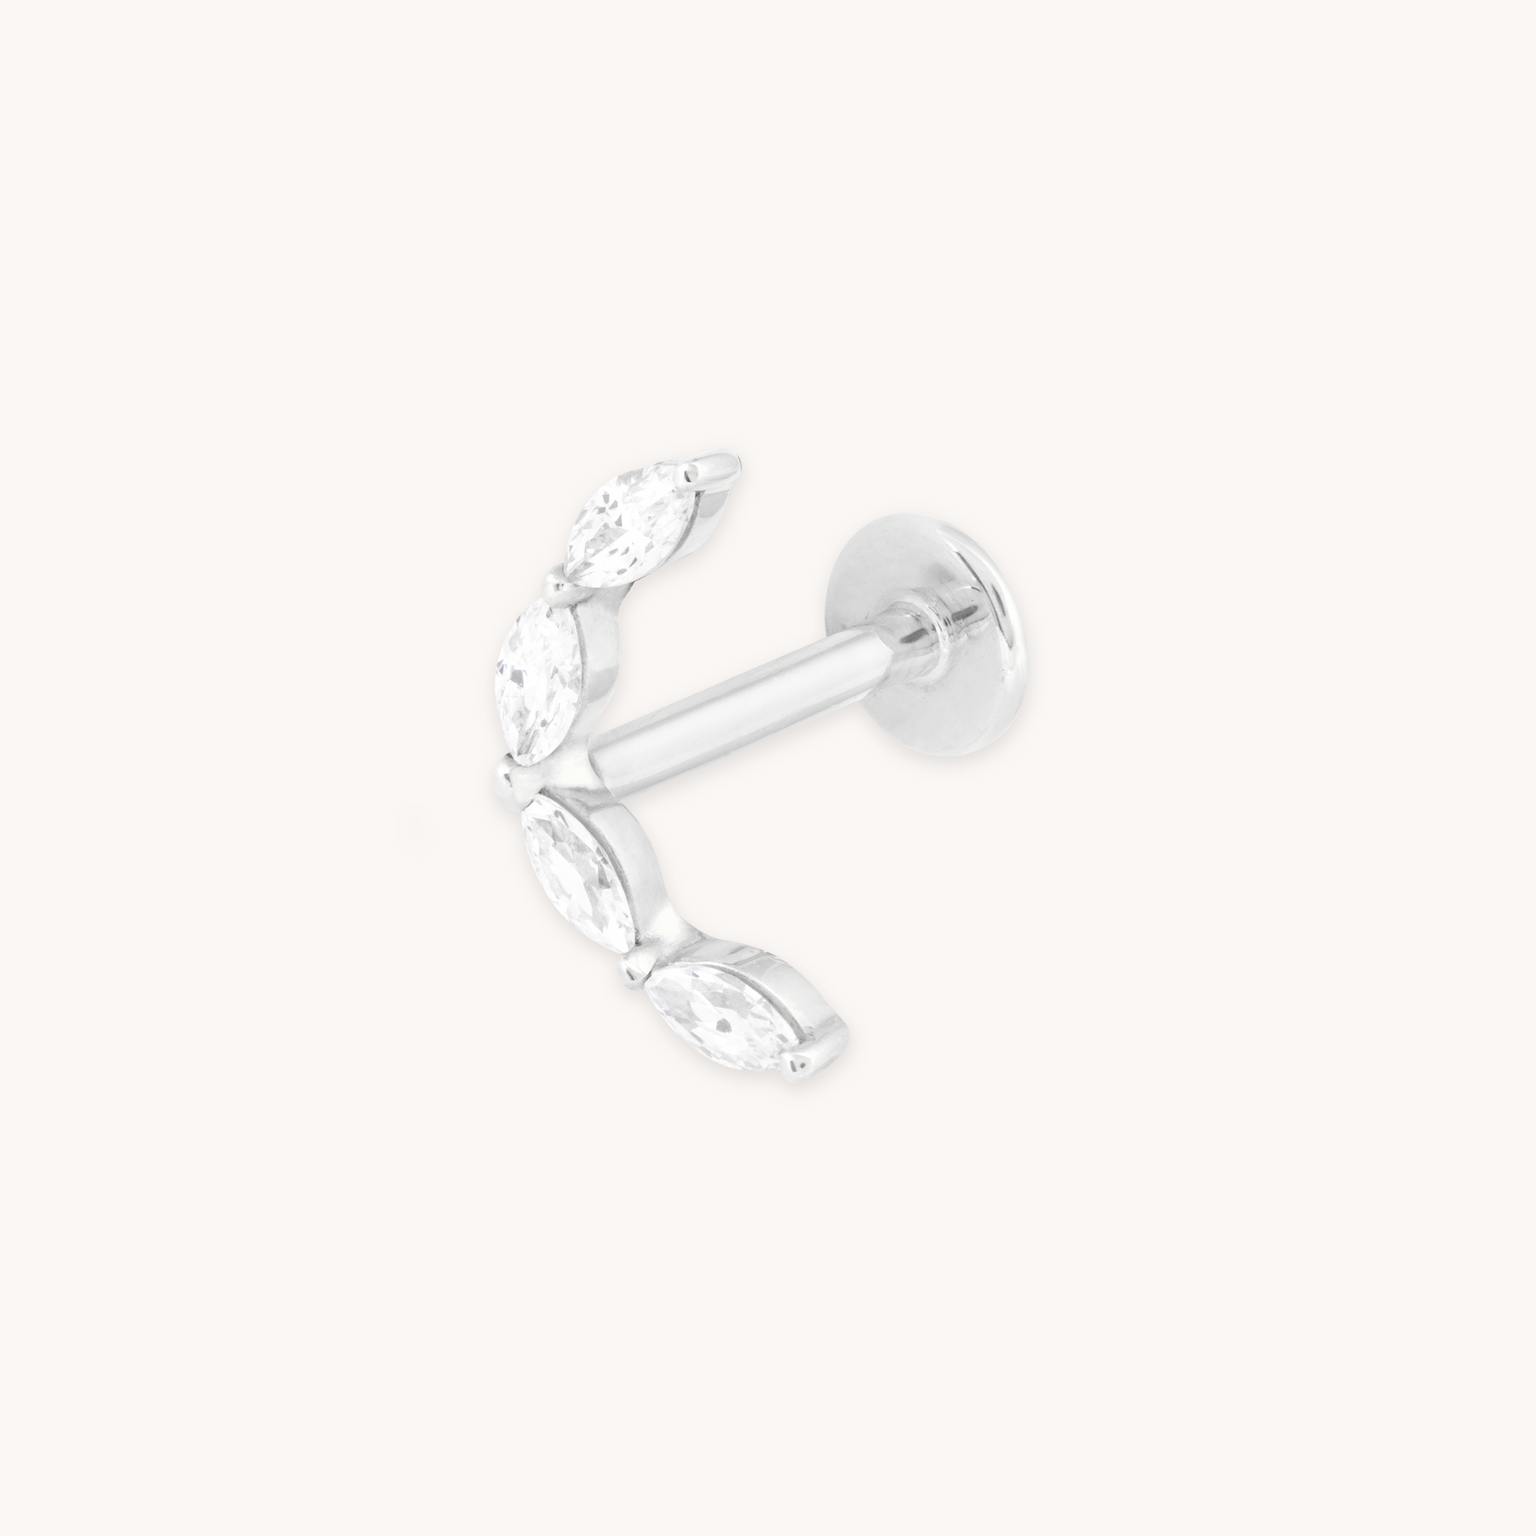 SOLID WHITE GOLD CRYSTAL CURVED PIERCING STUD CUT OUT